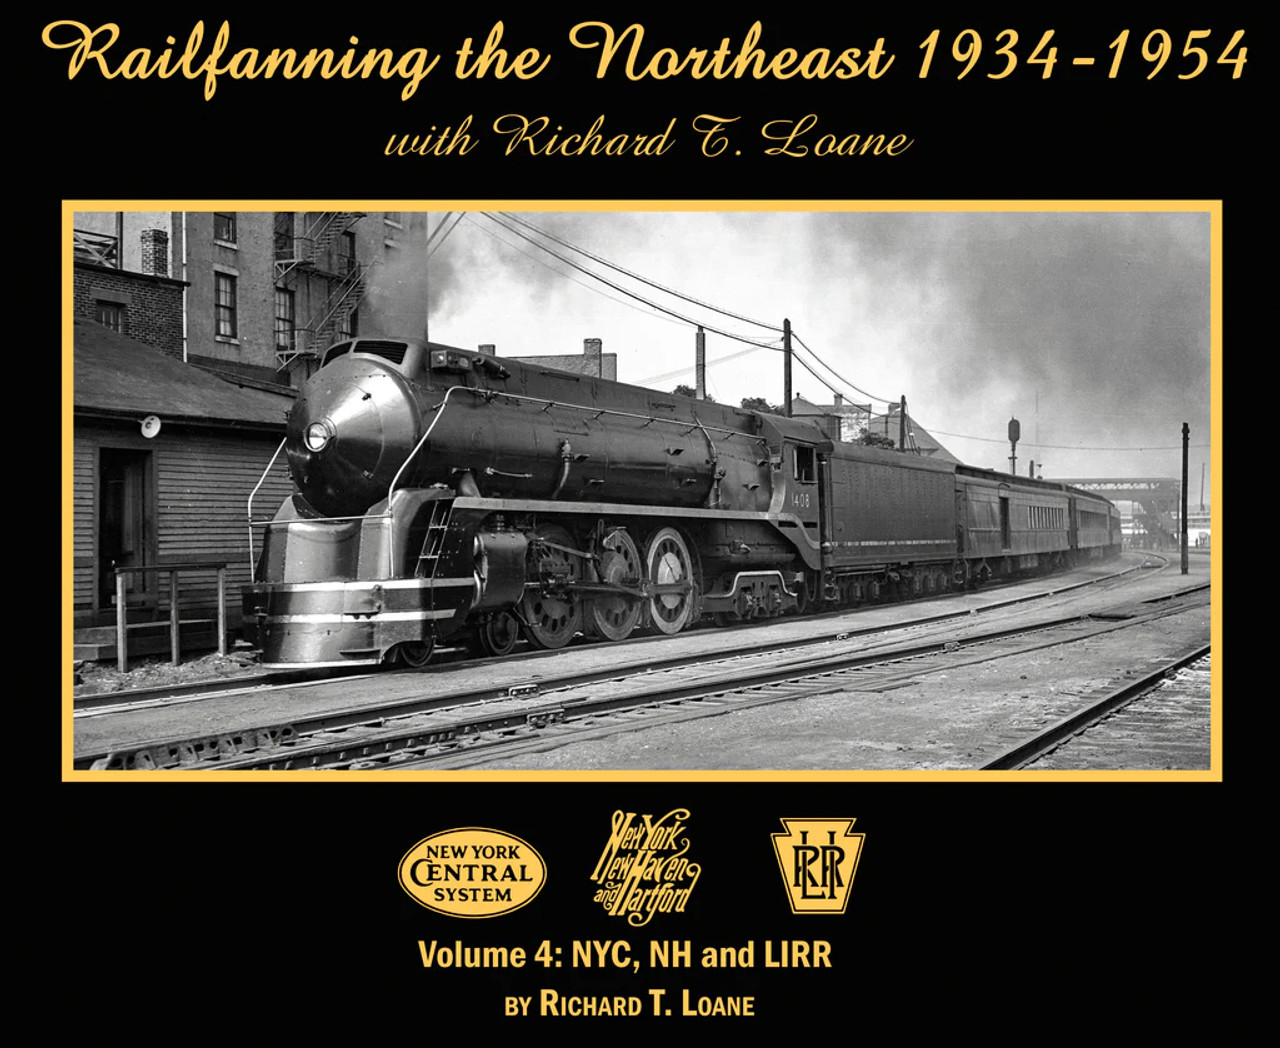 Morning Sun 6905 Railfanning the Northeast 1934-1954 with Richard T. Loane Volume 4: NYC, NH and LIRR (Softcover)